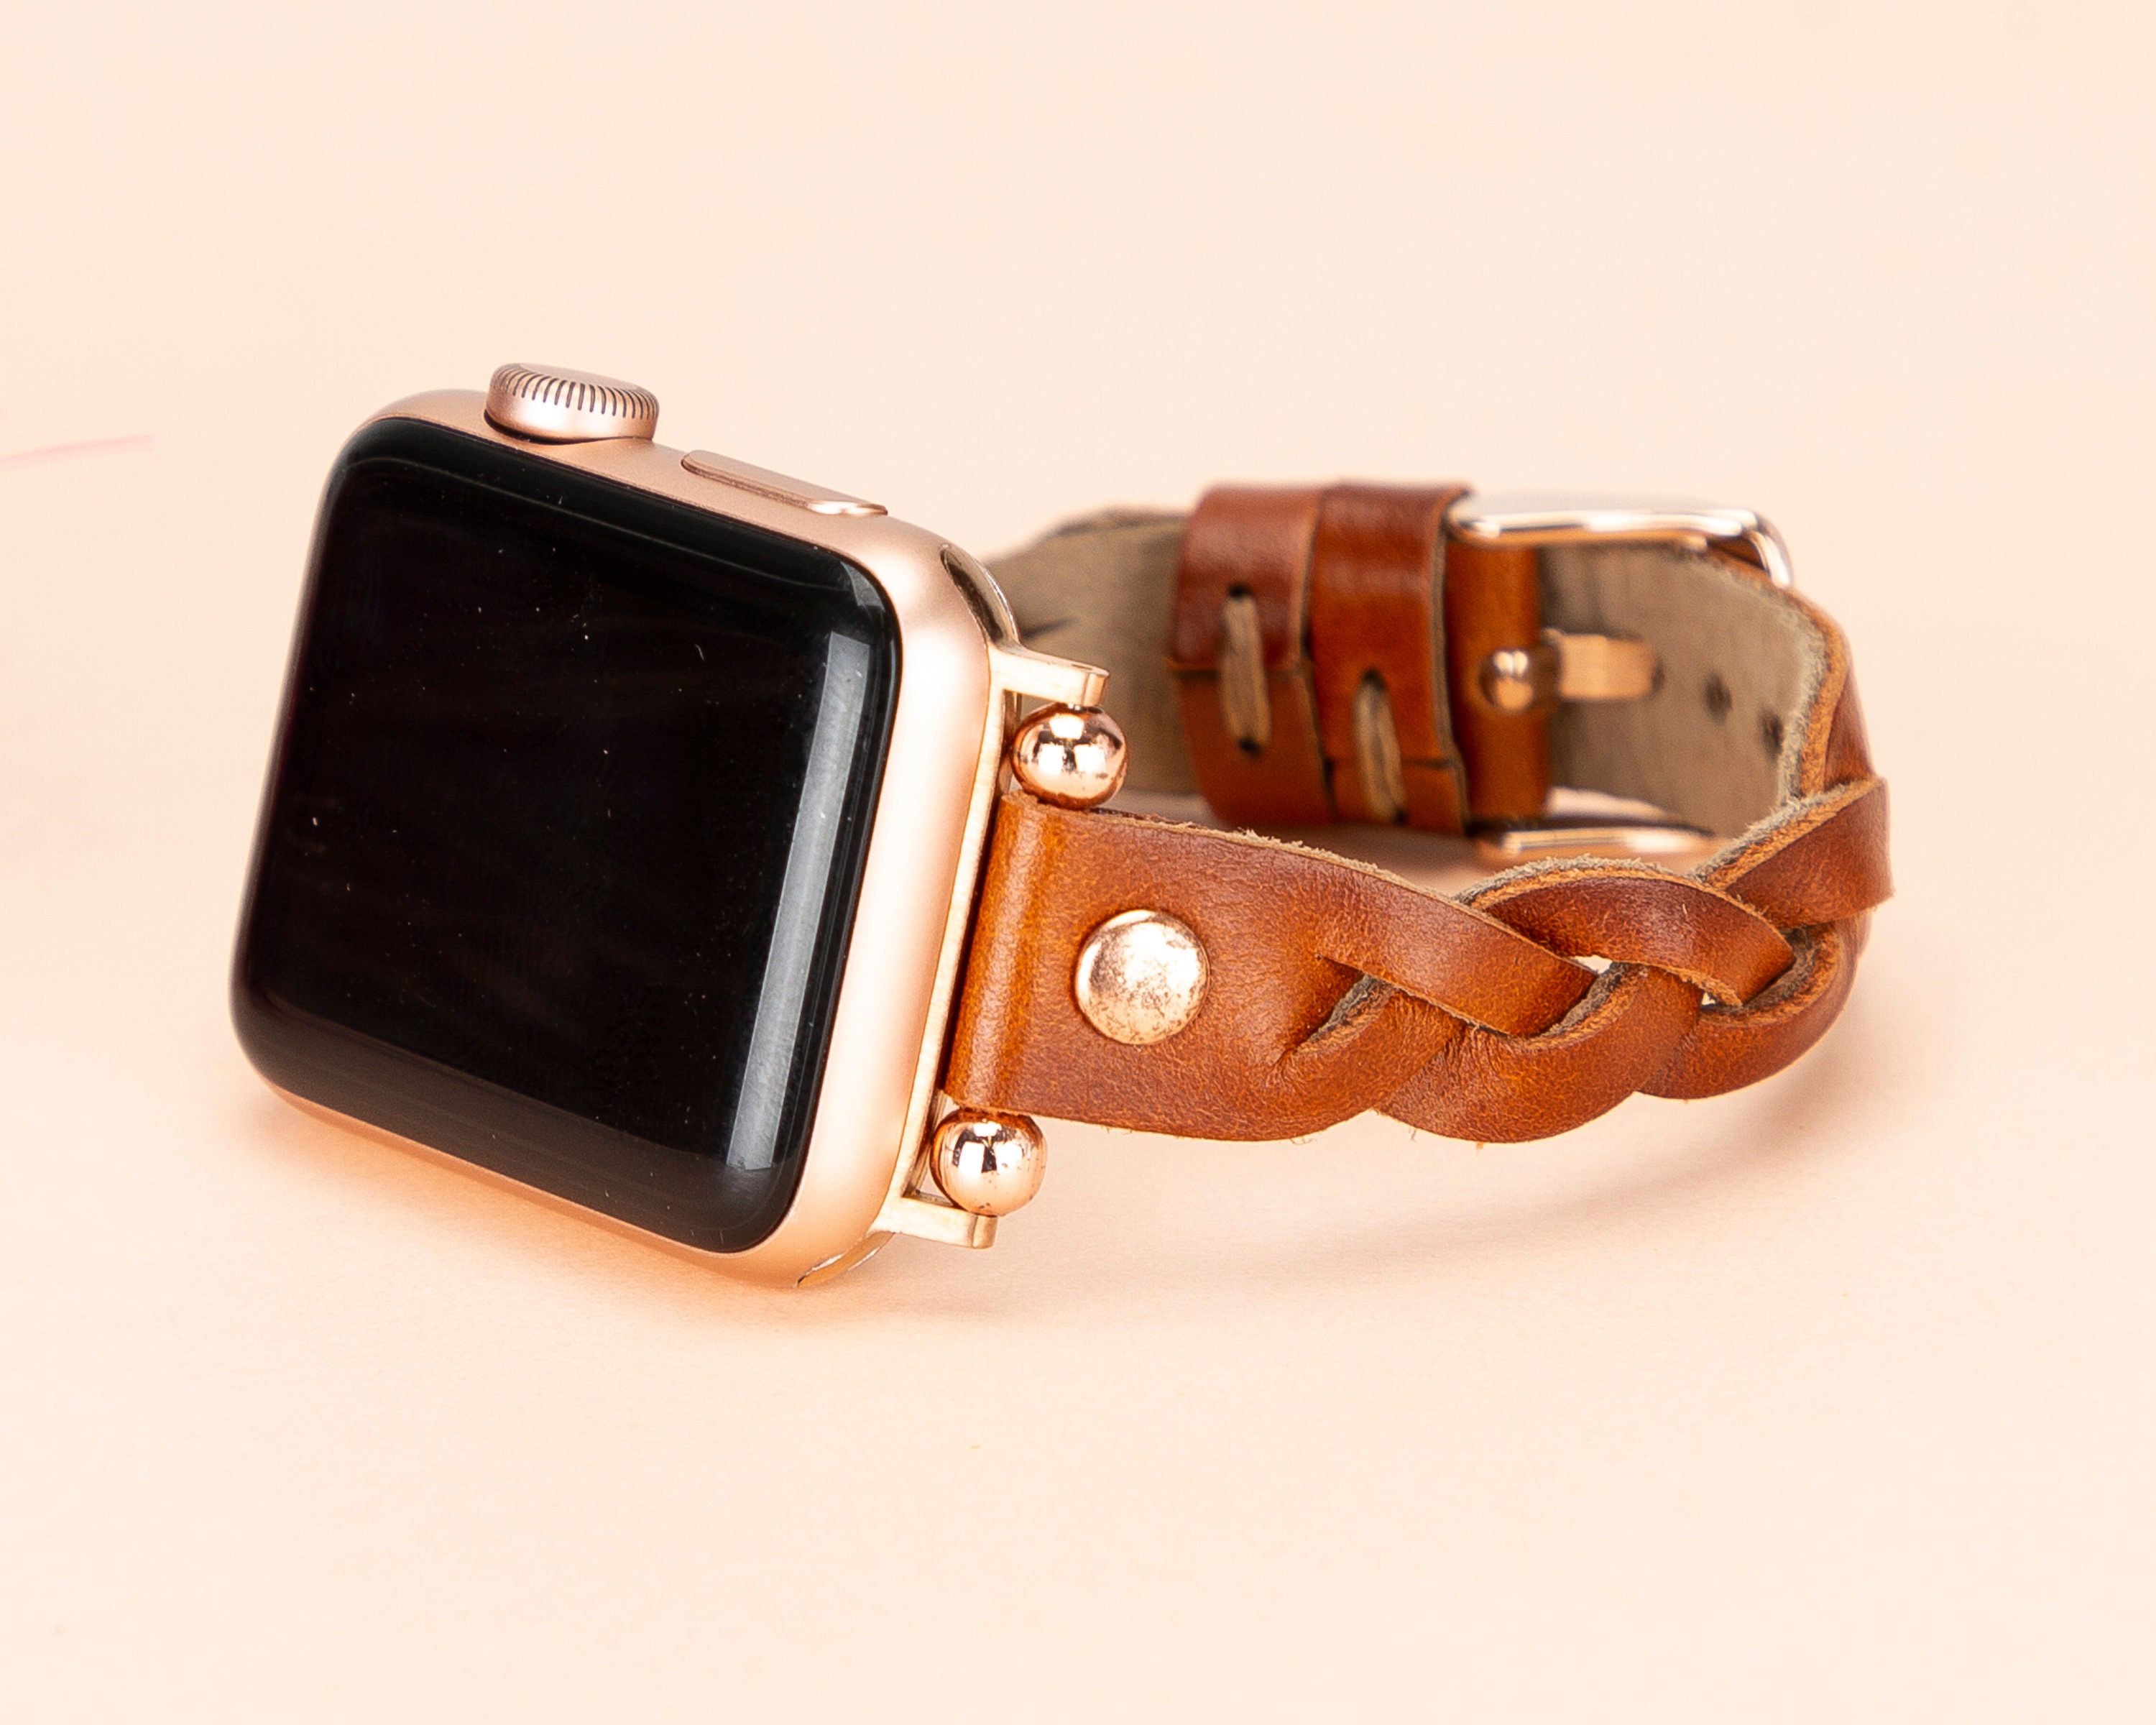 Genuine Leather For Apple watch band 44mm 40mm 42mm 38mm bracelet Belt for  iWatch Series 6 SE 5 4 3 44mm 40mm Band Accessories